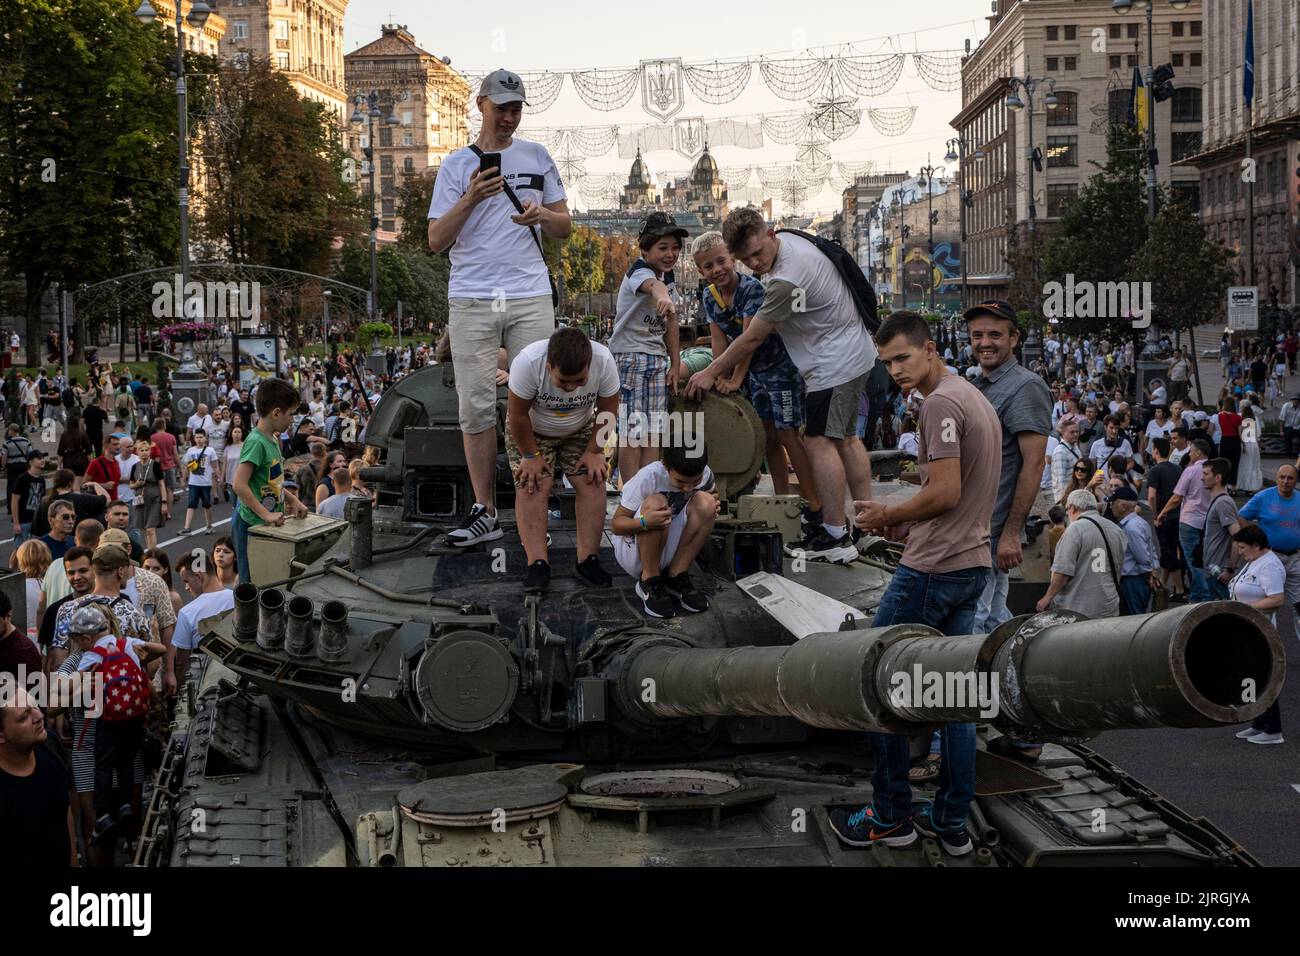 Kyiv, Kyiv Oblast, Ukraine. 21st Aug, 2022. Teenagers and children climb up to the top of a wreckage of a Russian tank as people flocked to see the display of destroyed Russian tanks on the streets of Kyiv. As dedicated to the upcoming Independence Day of Ukraine, and nearly 6 months after the full-scale invasion of Ukraine on February 24, the country's capital Kyiv holds an exhibition on the main street of Khreschaytk Street showing multiple destroyed military equipment, tanks and weapons from The Armed Forces of The Russian Federation (AFRF).As the Russian full invasion of Ukraine started Stock Photo